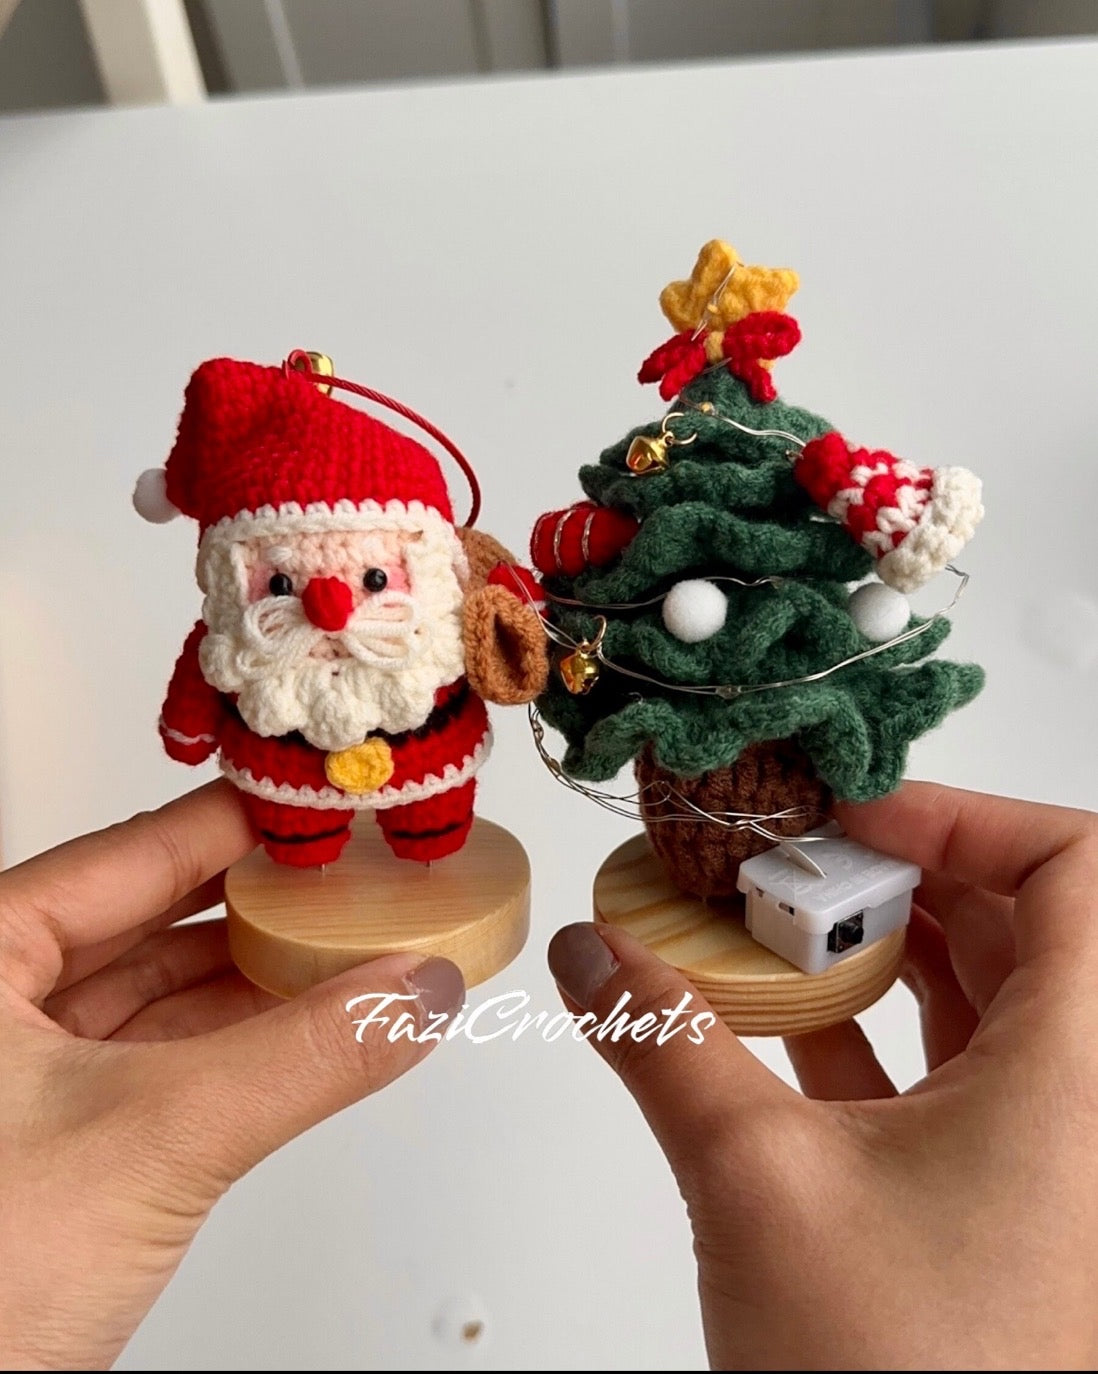 Crochet Christmas Gift Set w Santa Claus and Christmas Tree with Wood Stands